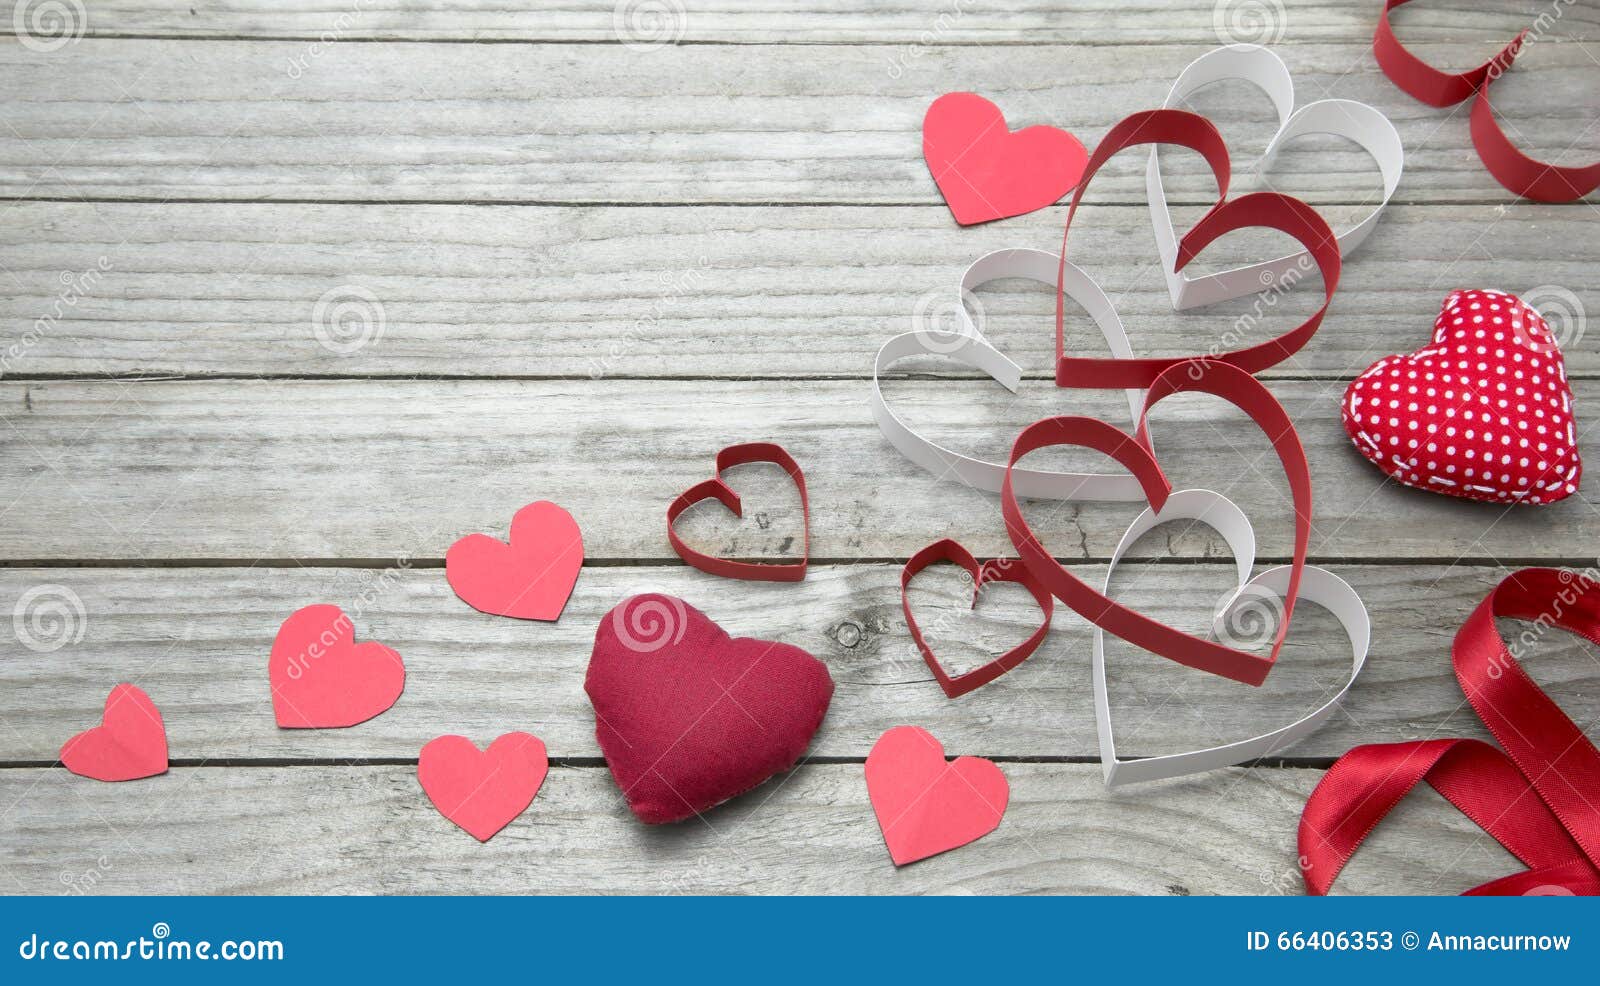 Assorted hearts stock image. Image of love, assorted - 66406353